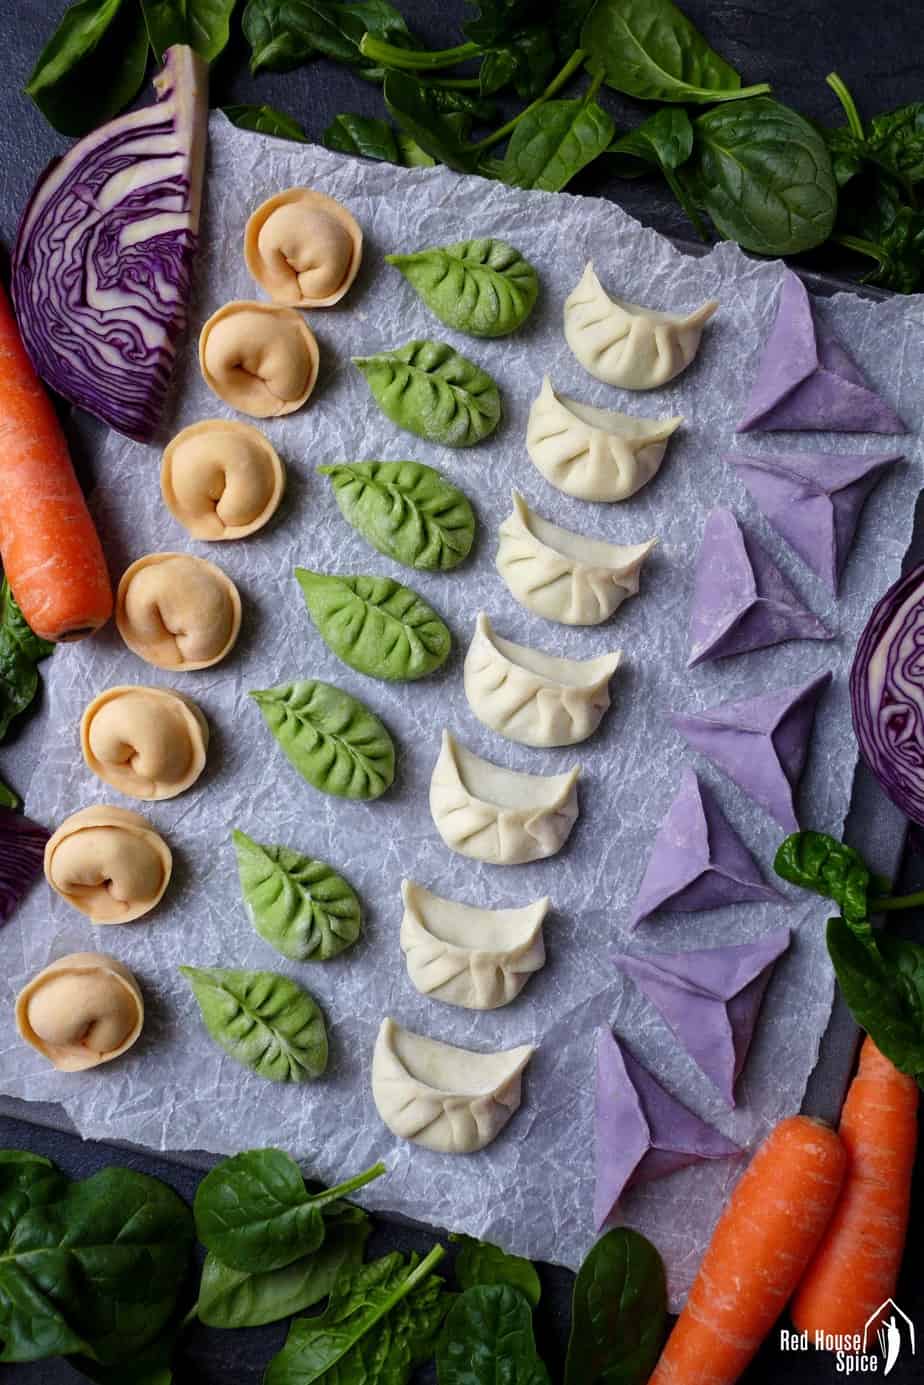 Chinese dumplings made in four colours and shapes for Chinese New Year.